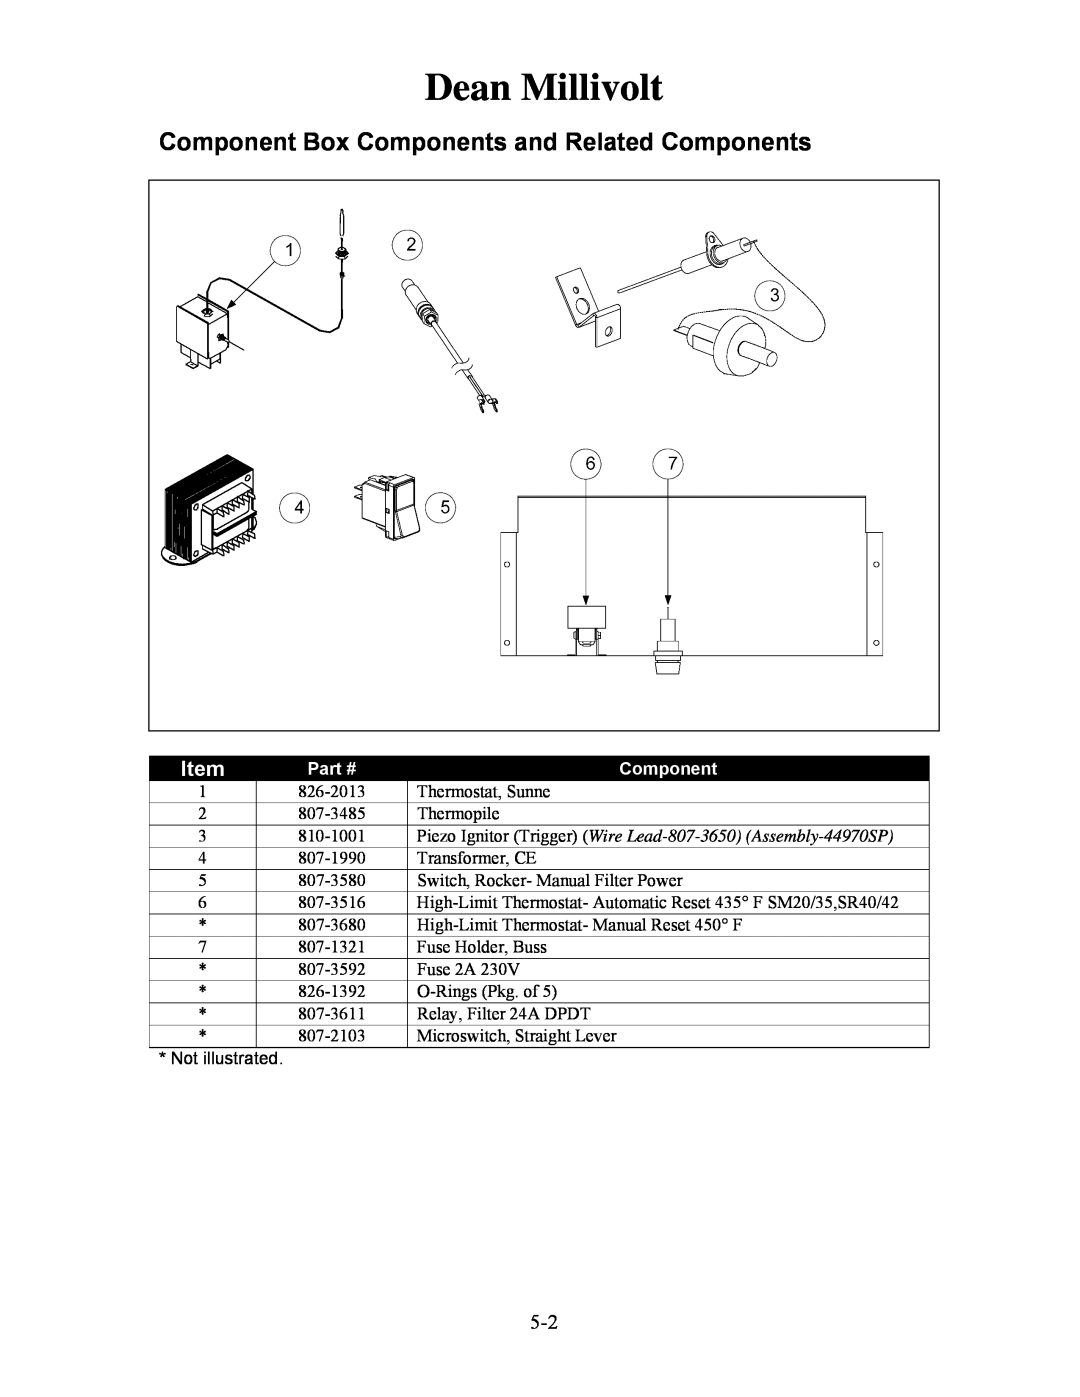 Frymaster H50 manual Component Box Components and Related Components, Dean Millivolt 